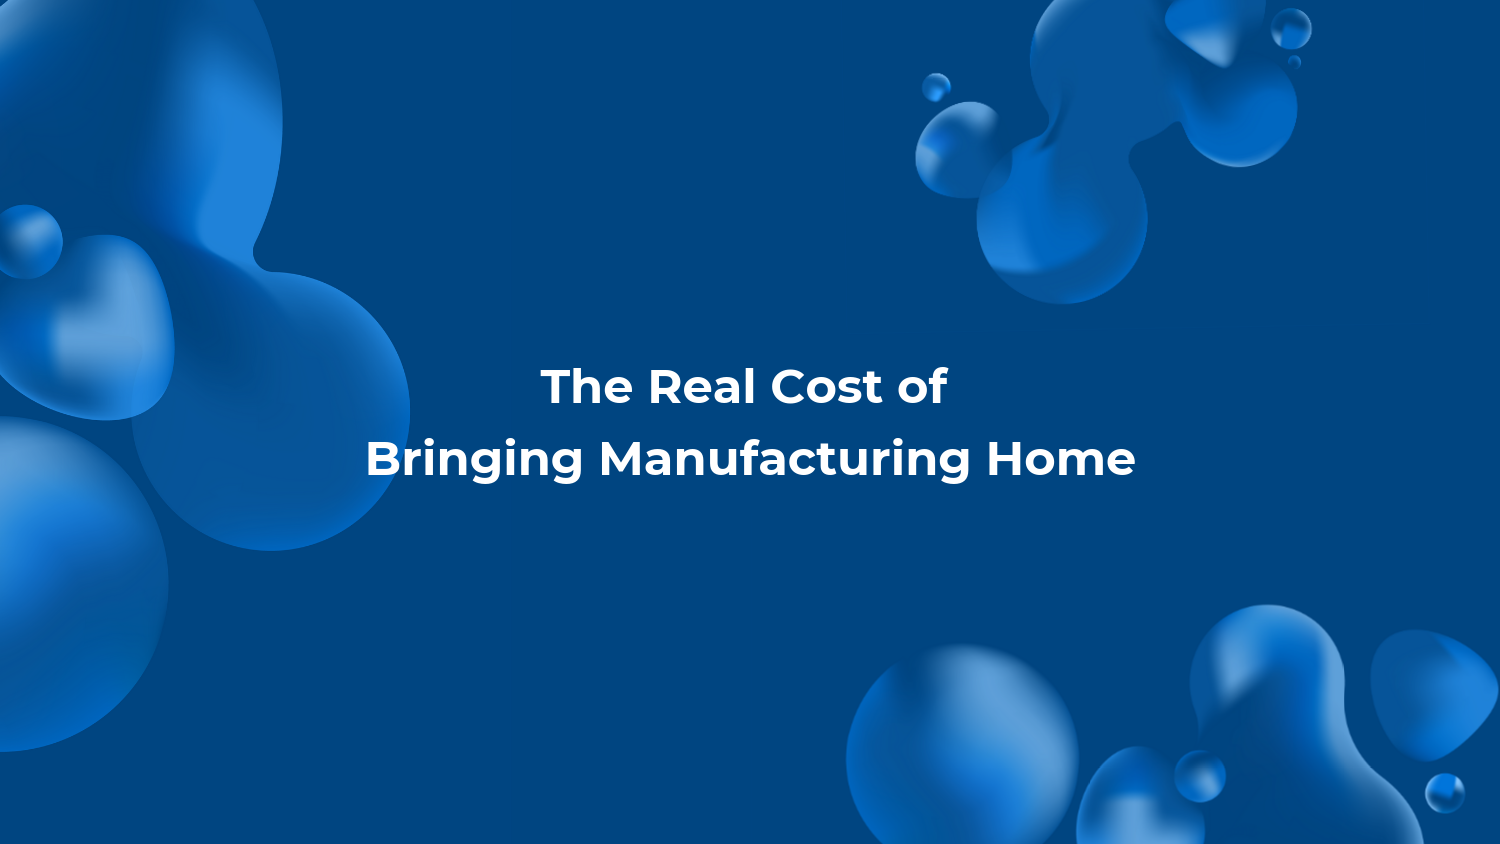 The Real Cost of Bringing Manufacturing Home